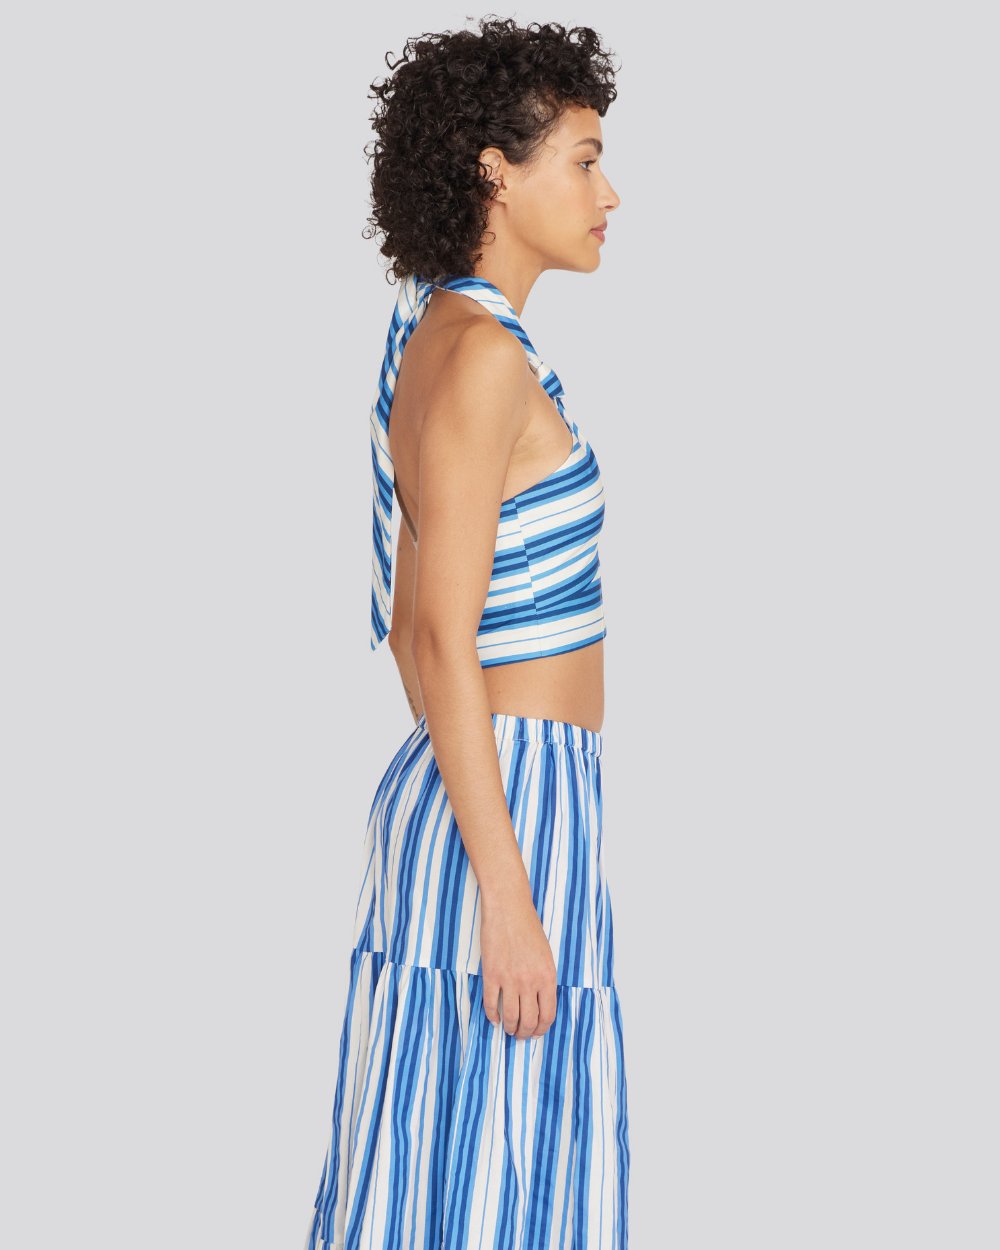 The Naomi Top - Solid & Striped